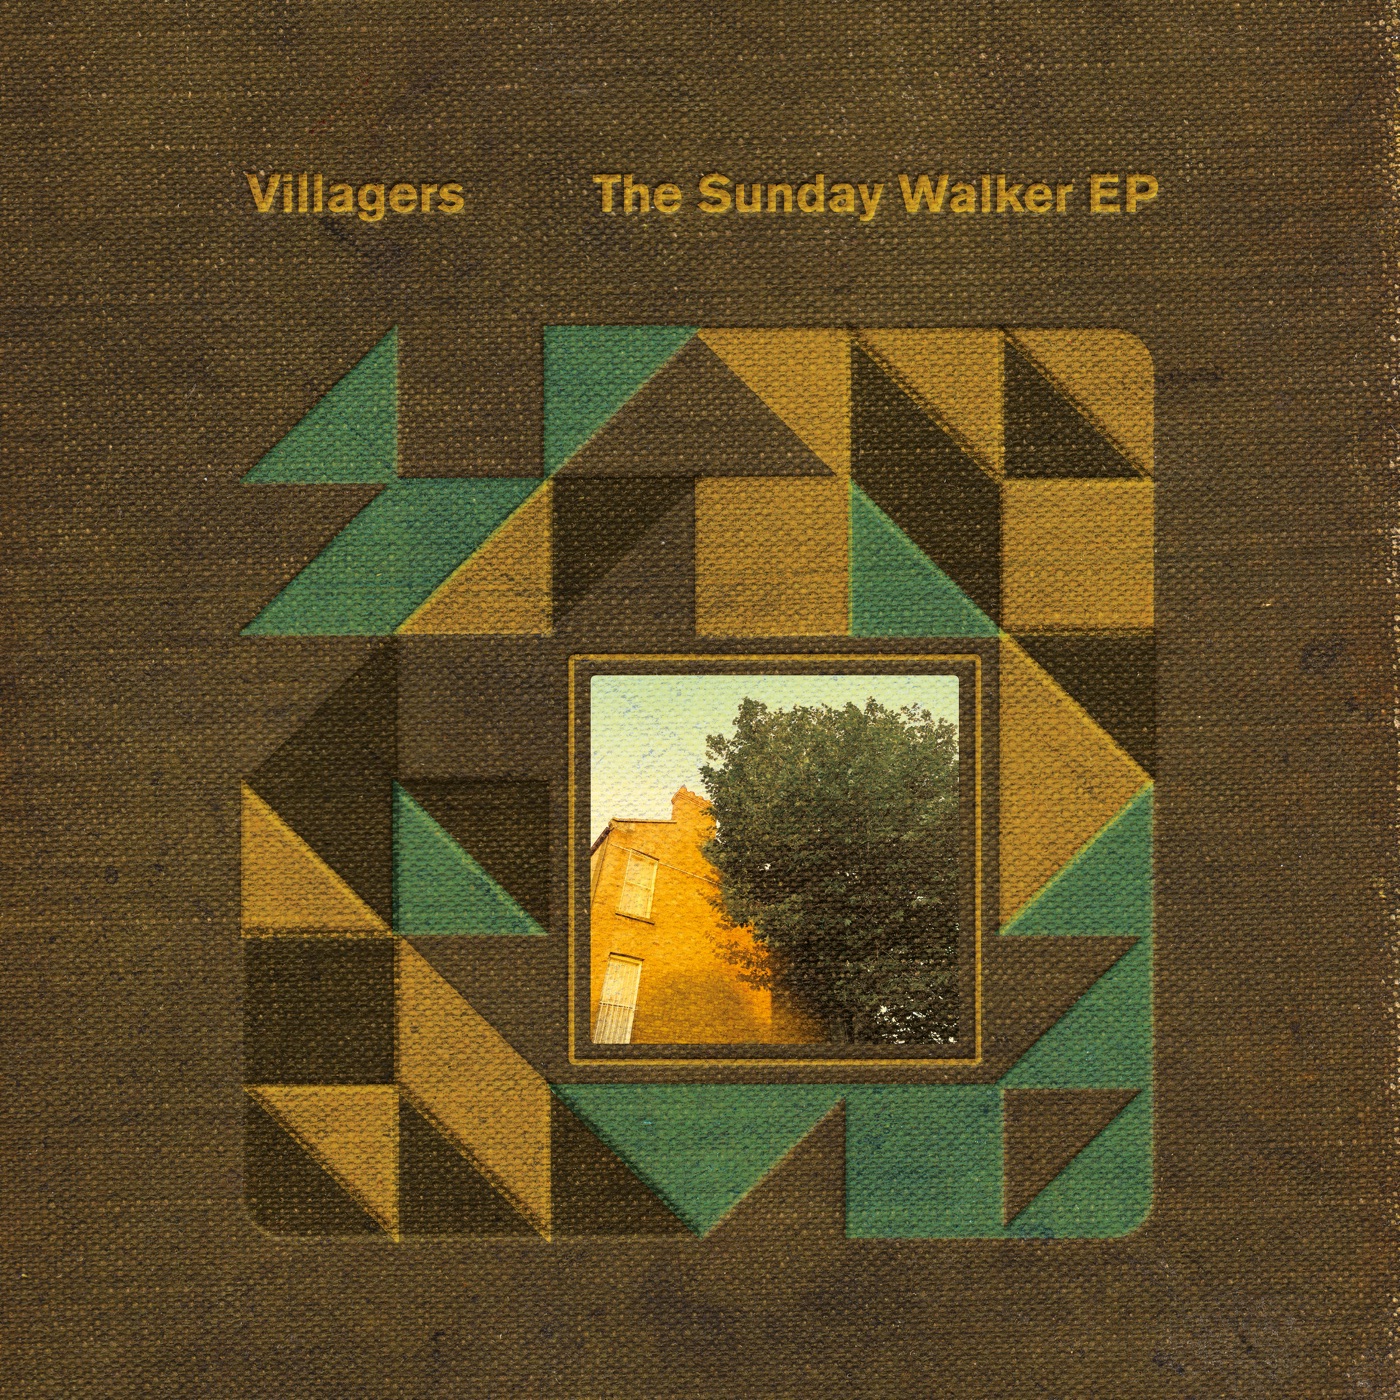 The Sunday Walker EP by Villagers